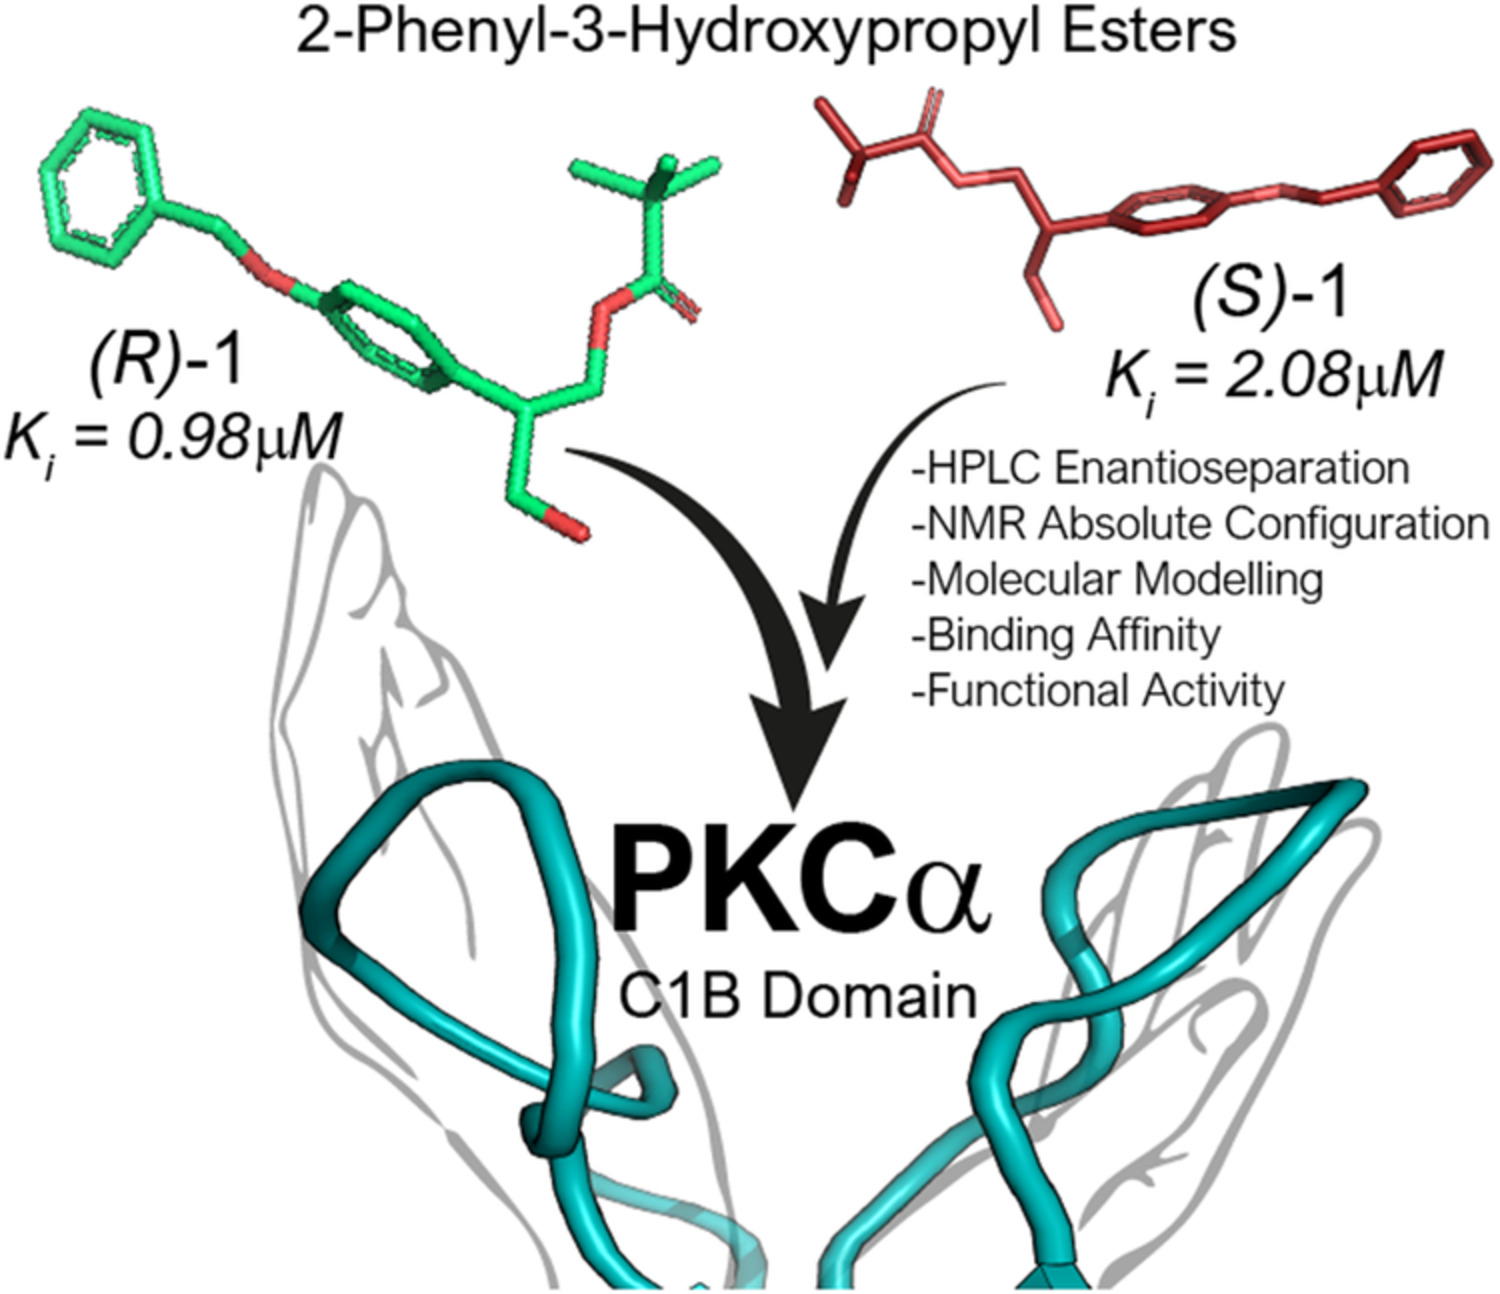 Chiral 2‐phenyl‐3‐hydroxypropyl esters as PKC‐alpha modulators: HPLC enantioseparation, NMR absolute configuration assignment, and molecular docking studies